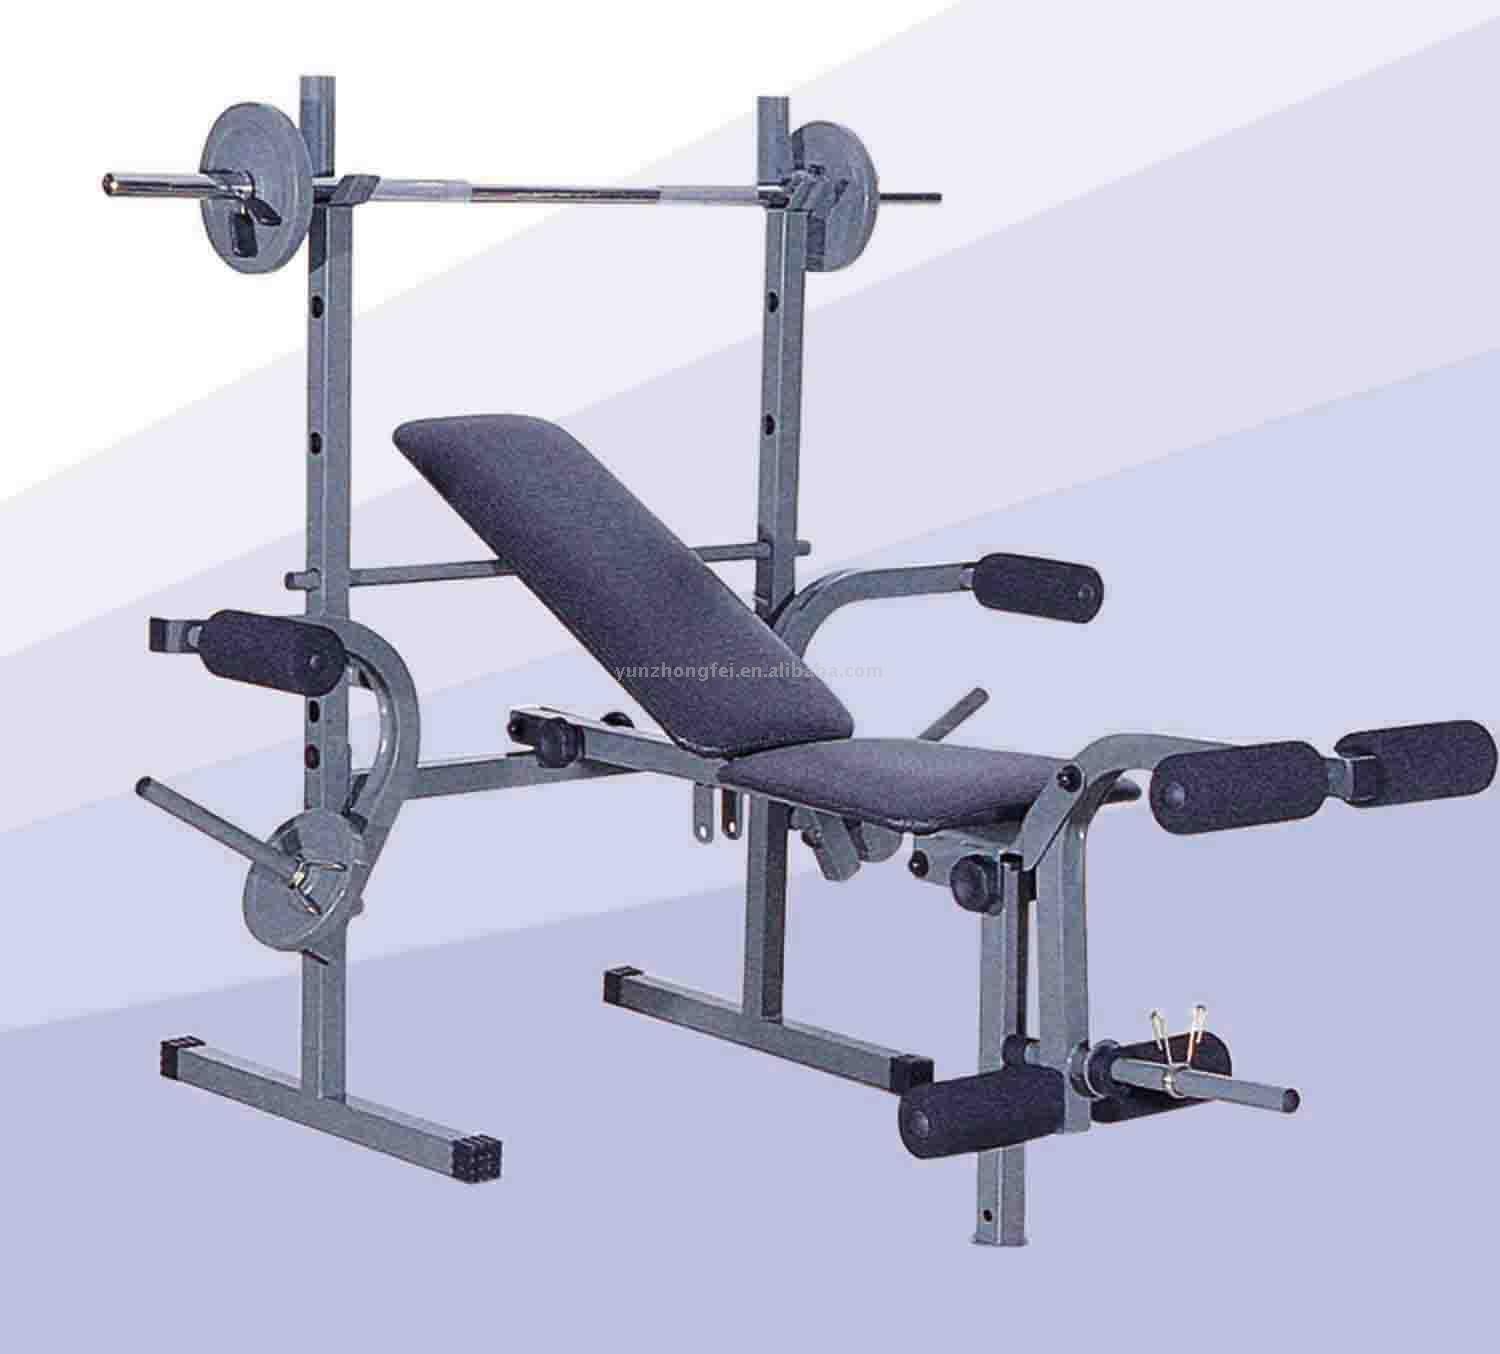 20 30 Minute Second hand weight bench near me Routine Workout